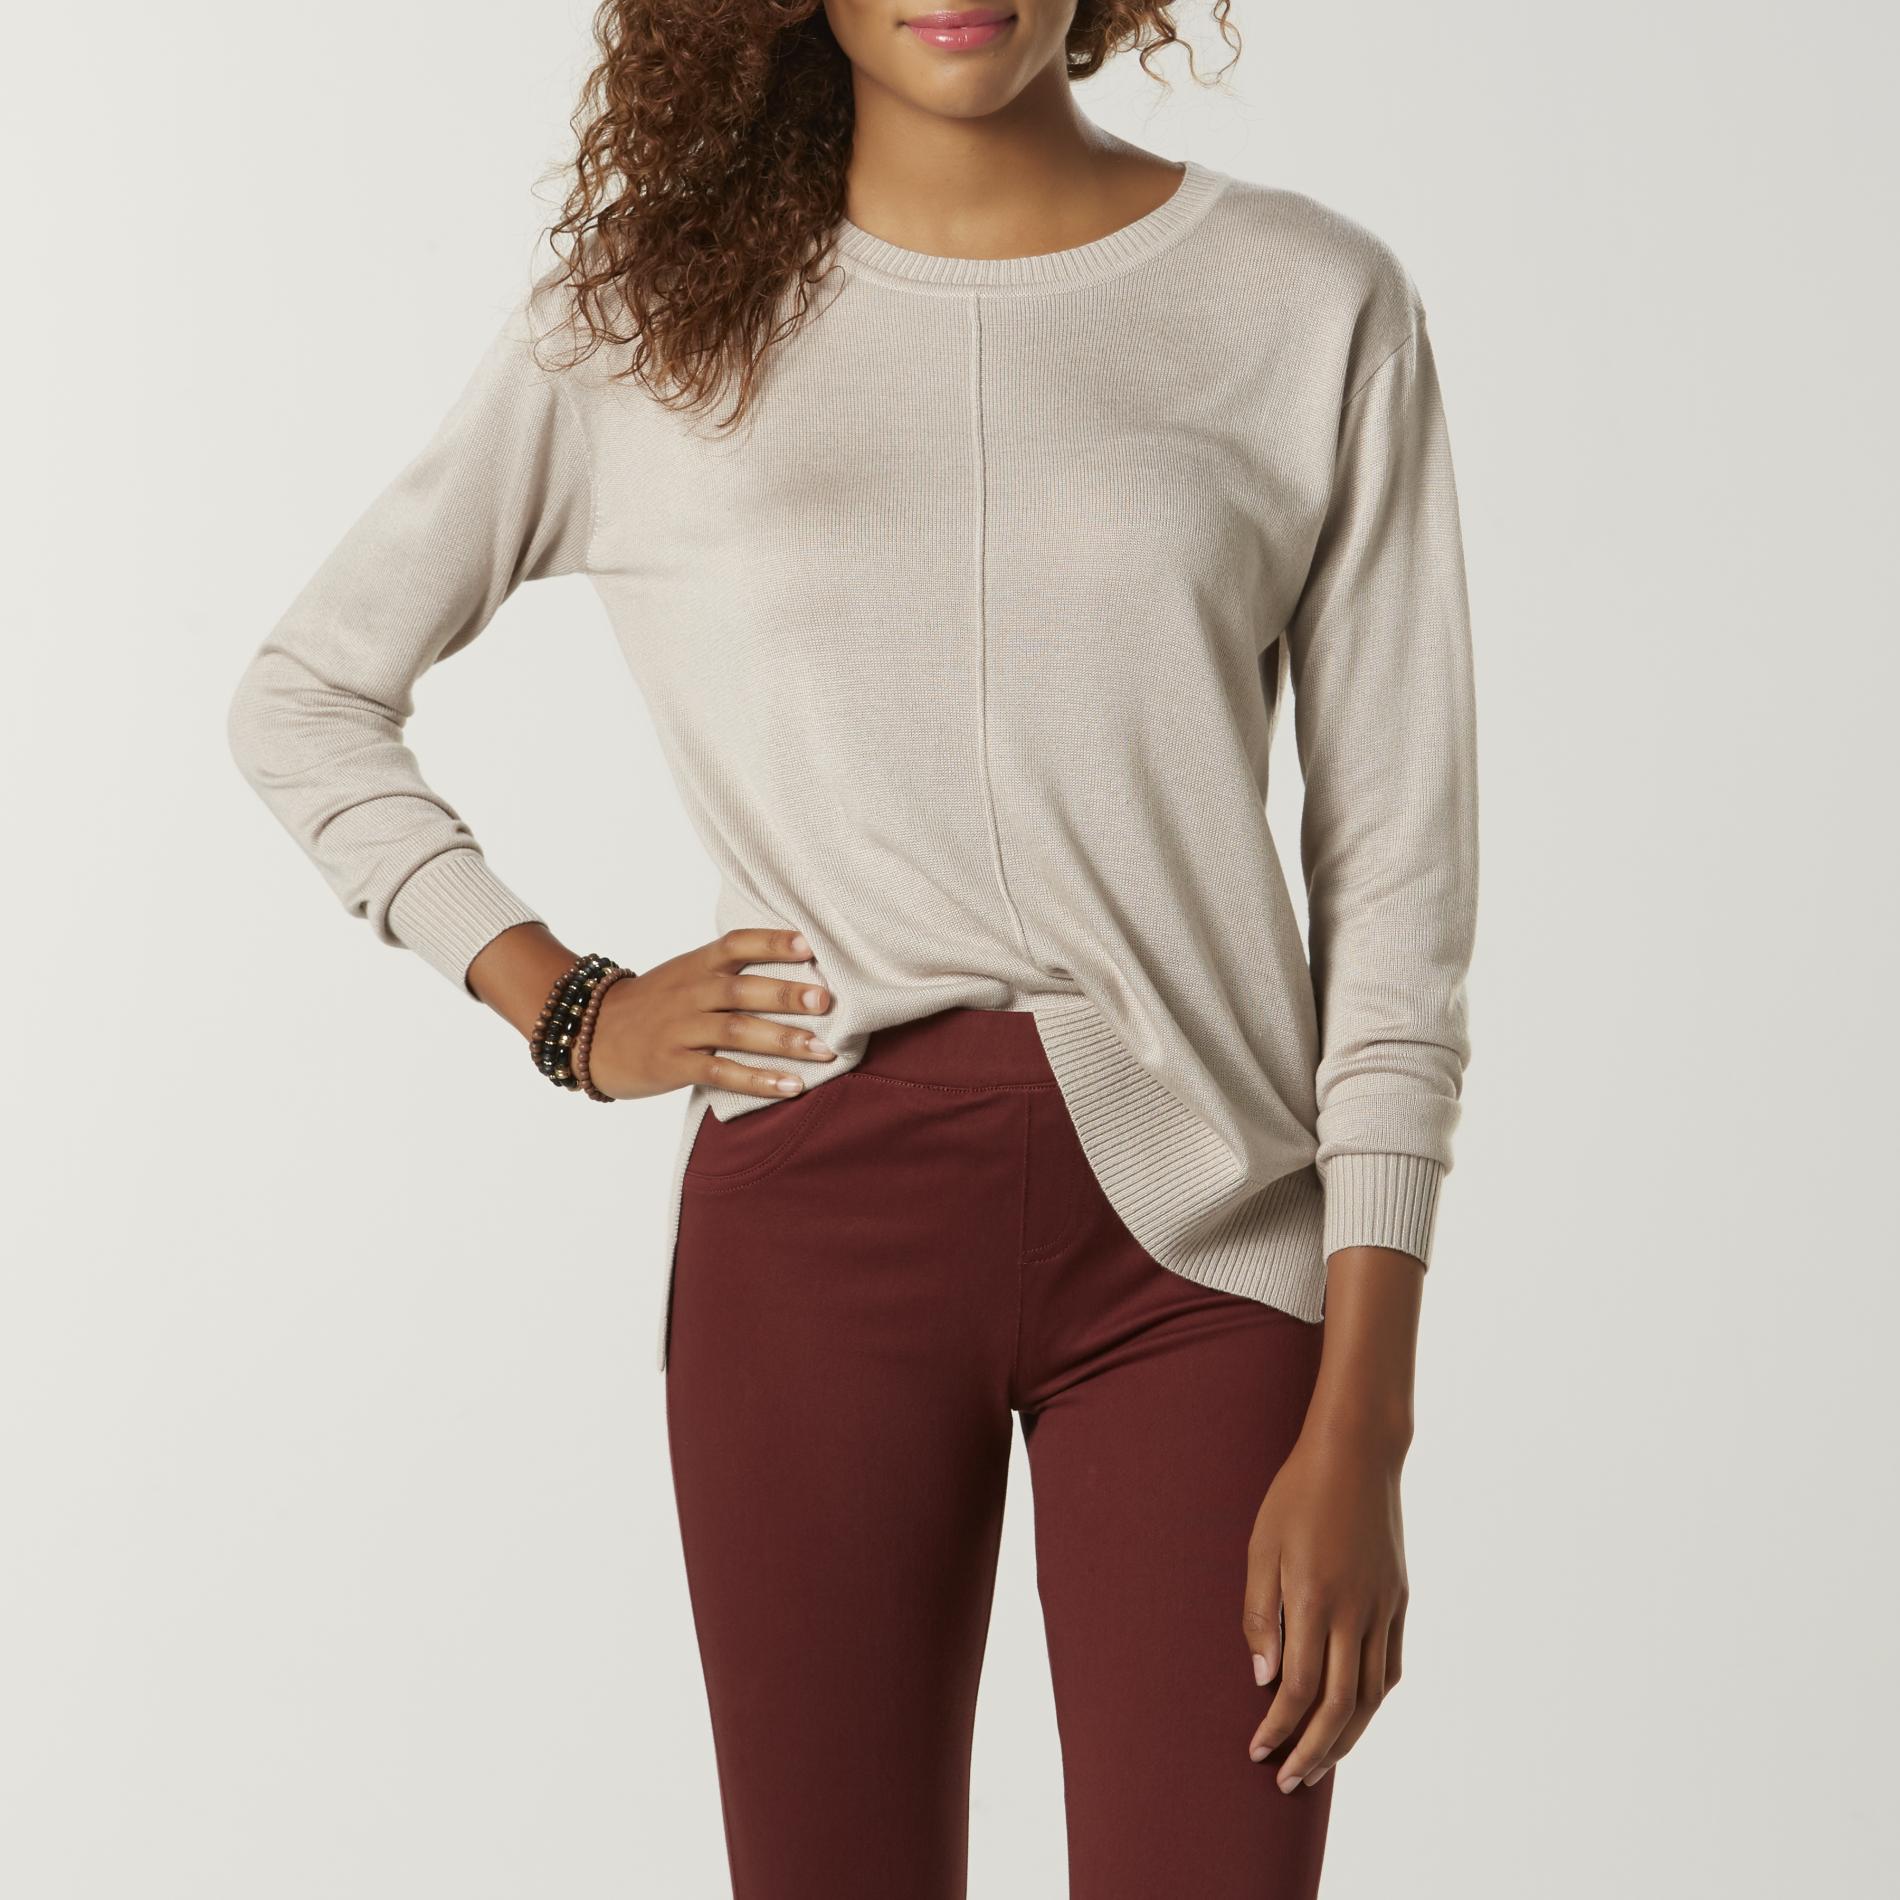 Simply Styled Women's Pullover Sweater